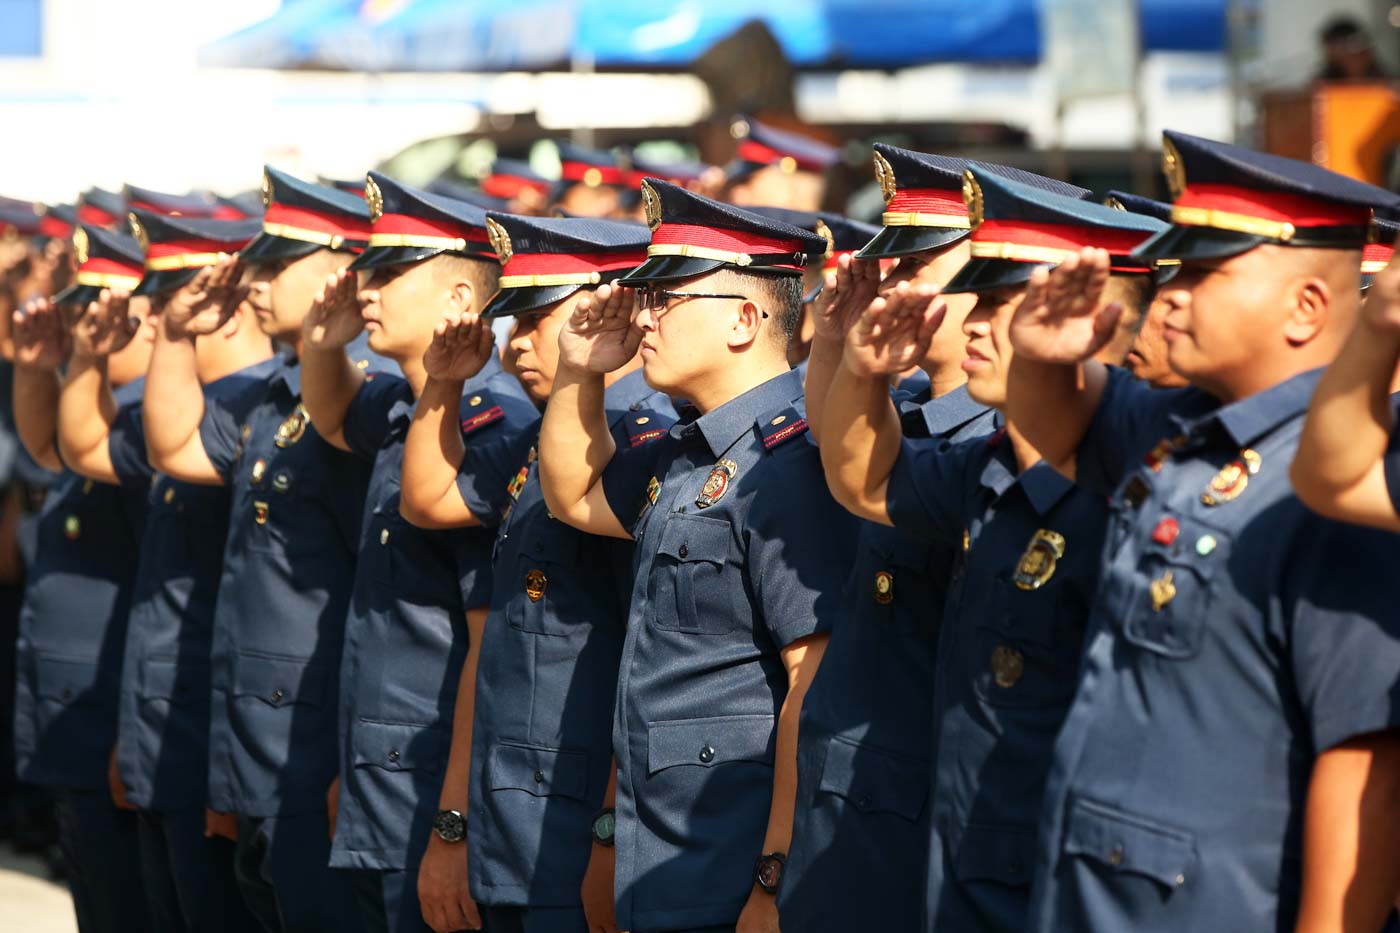 RULES APPLY. Police security details are not just bodyguards in uniform. File photo by Ben Nabong/Rappler 